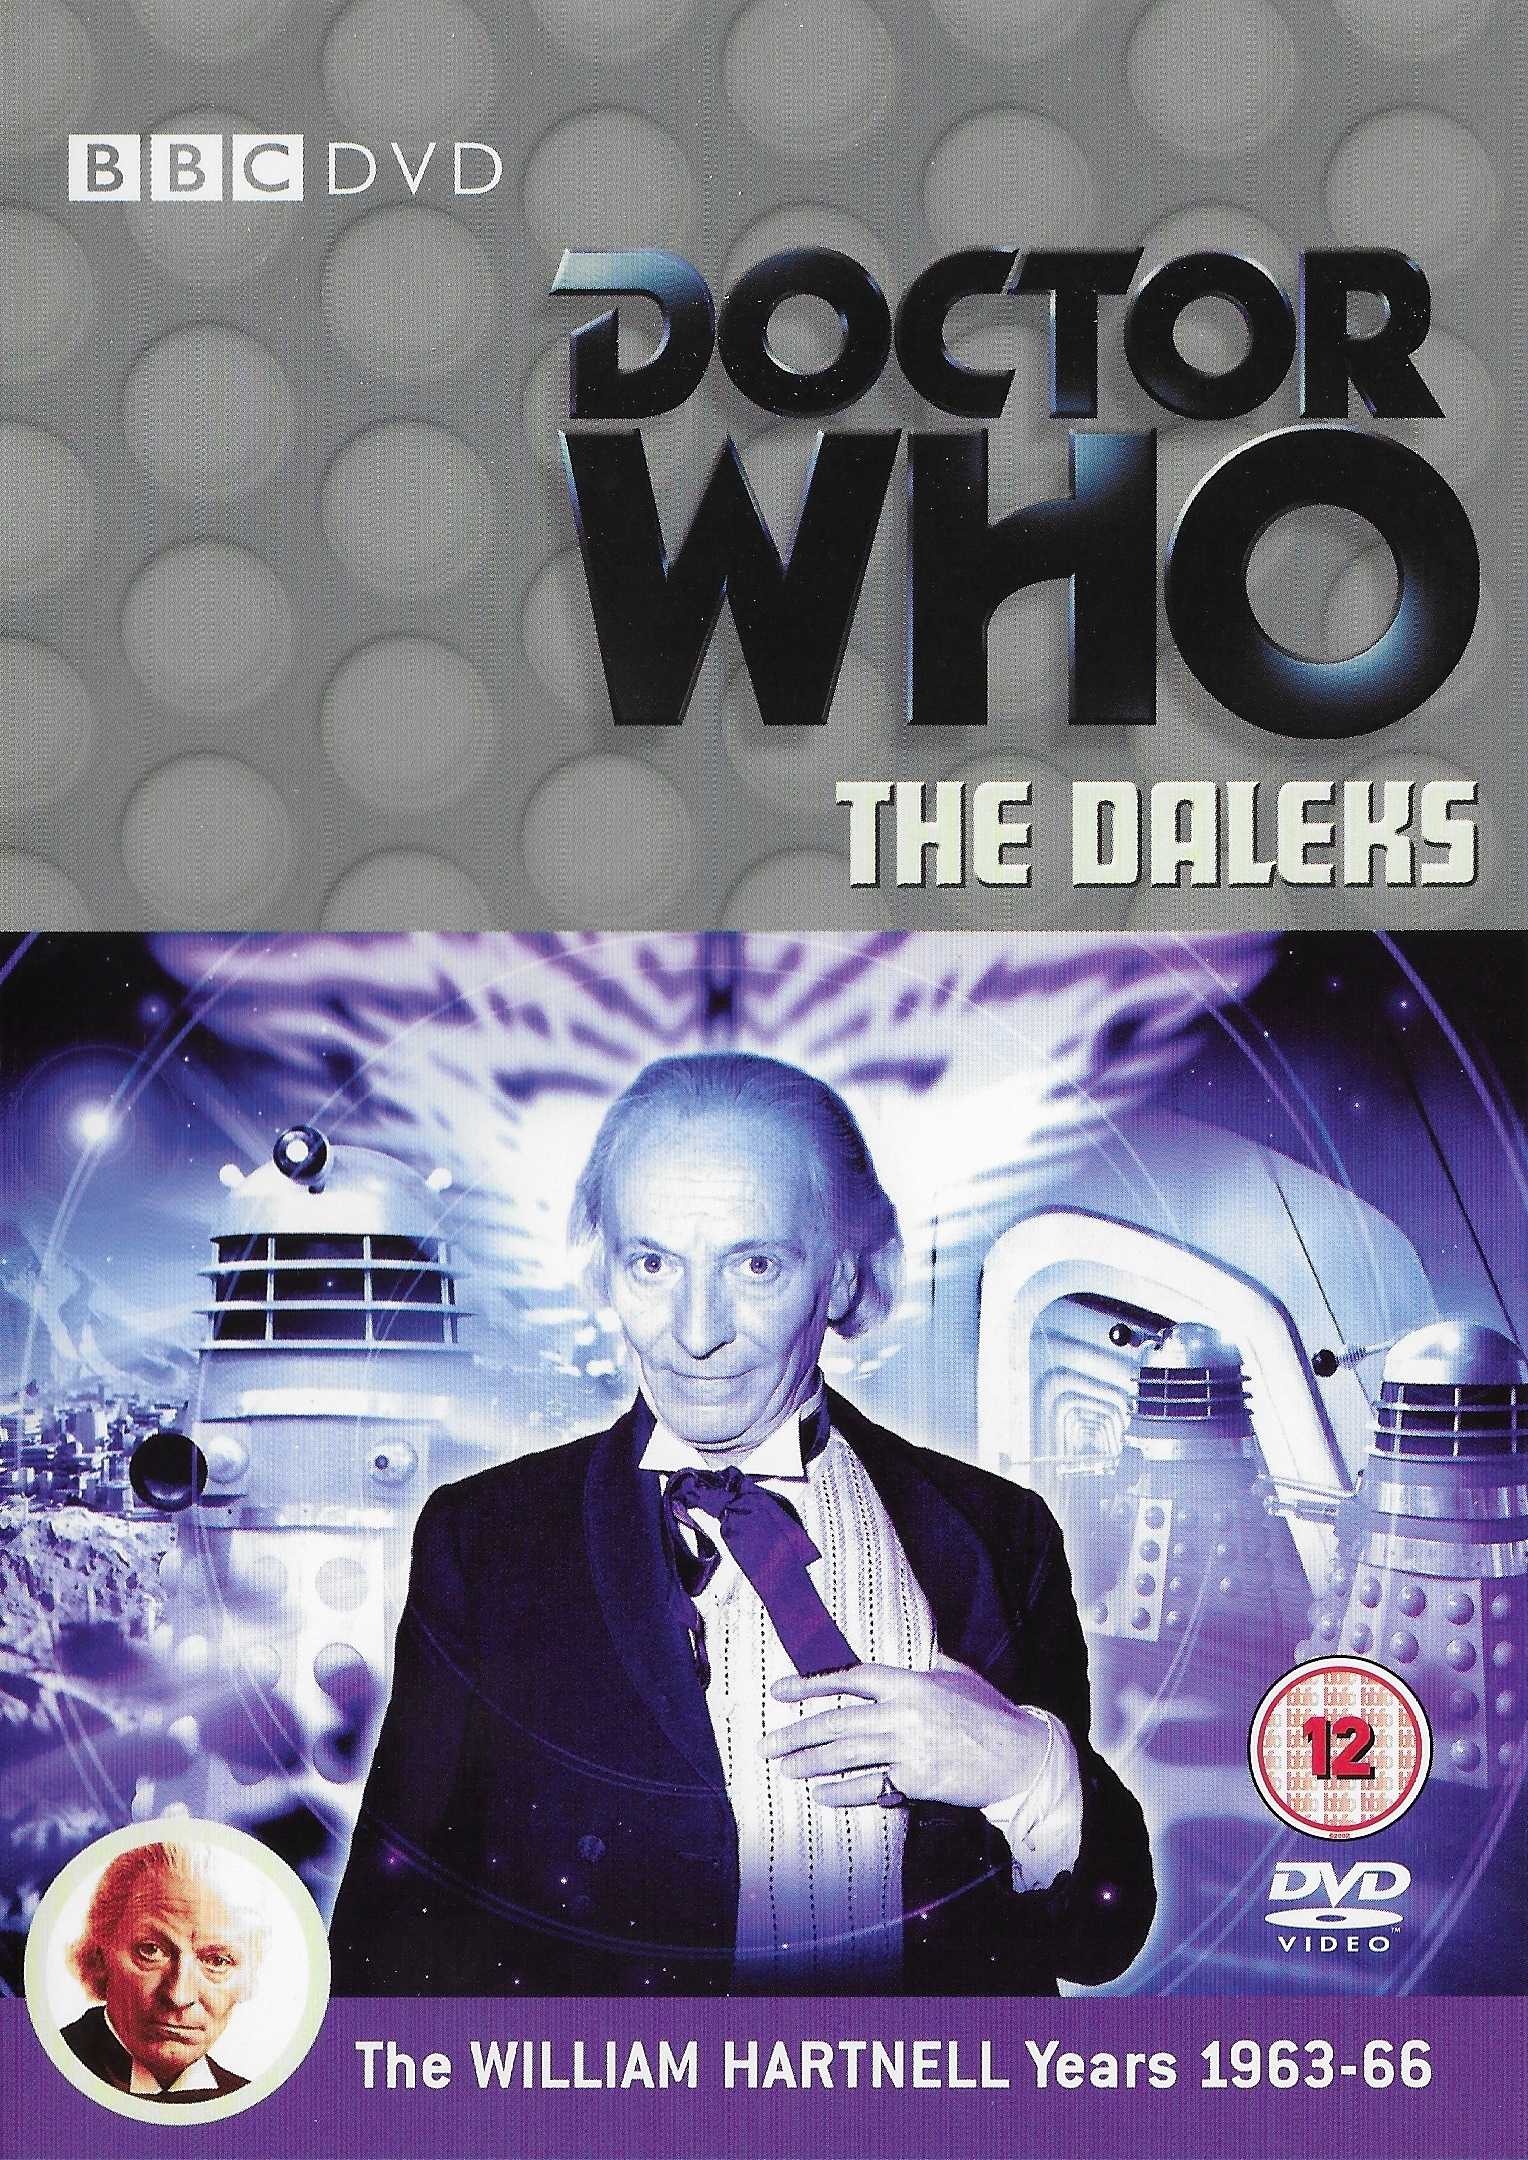 Picture of BBCDVD 1882B Doctor Who - The Daleks by artist Terry Nation from the BBC dvds - Records and Tapes library